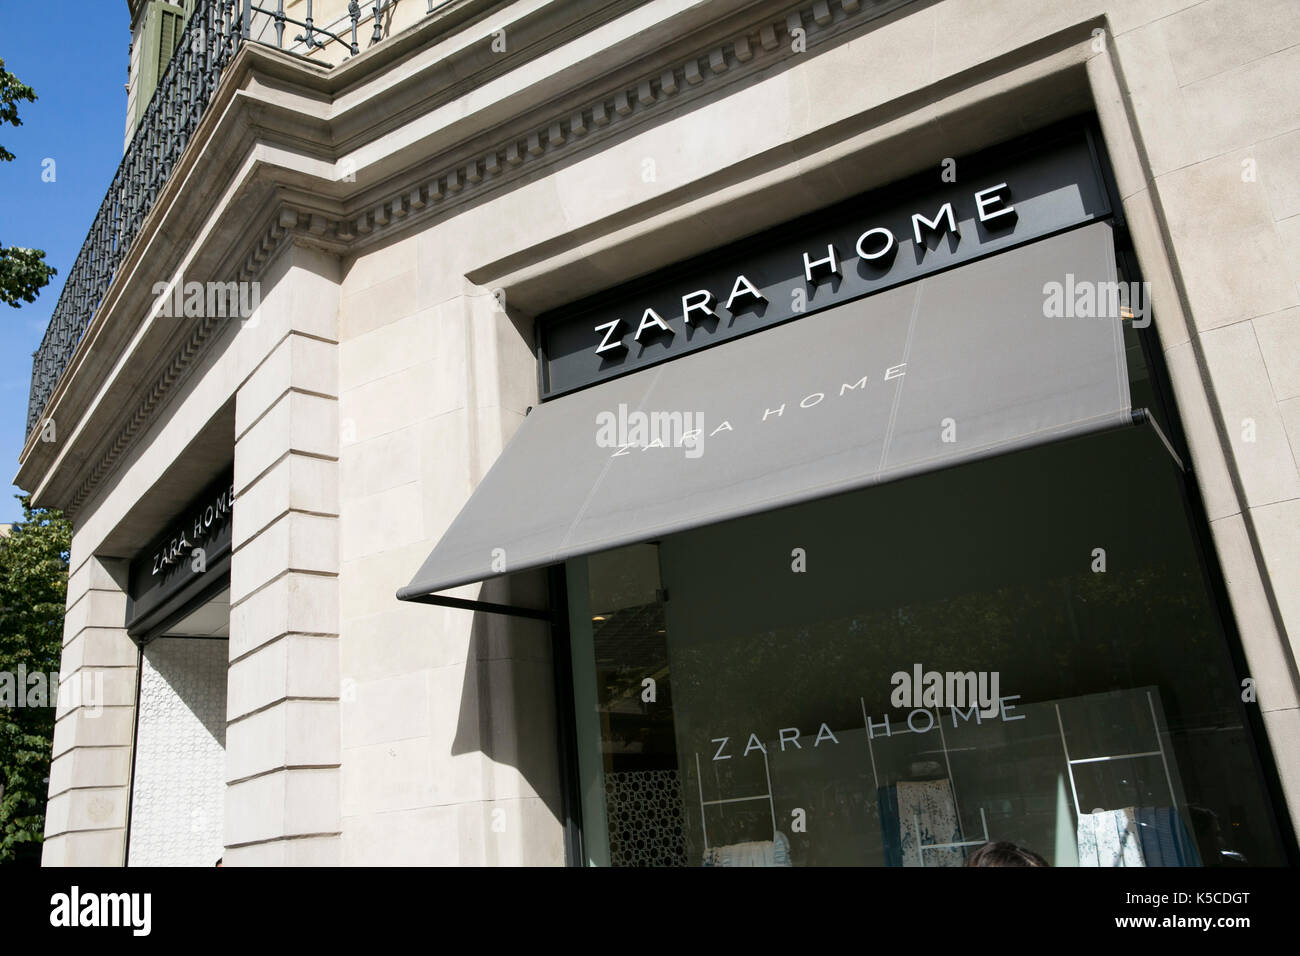 A logo sign outside of a Zara Home retail store in Barcelona, Spain Stock  Photo - Alamy